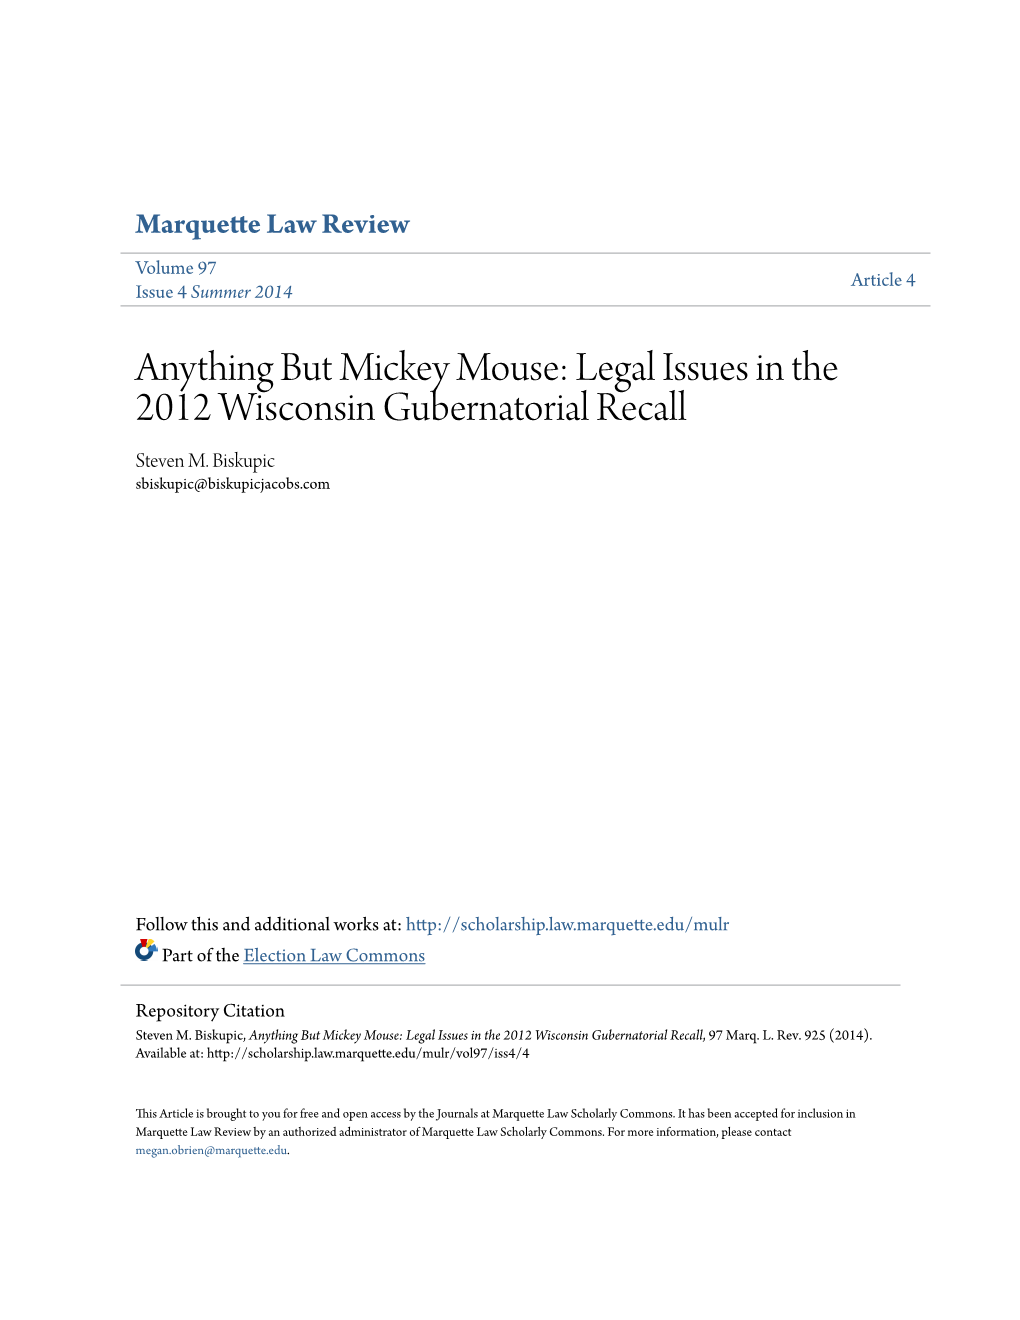 Anything but Mickey Mouse: Legal Issues in the 2012 Wisconsin Gubernatorial Recall Steven M